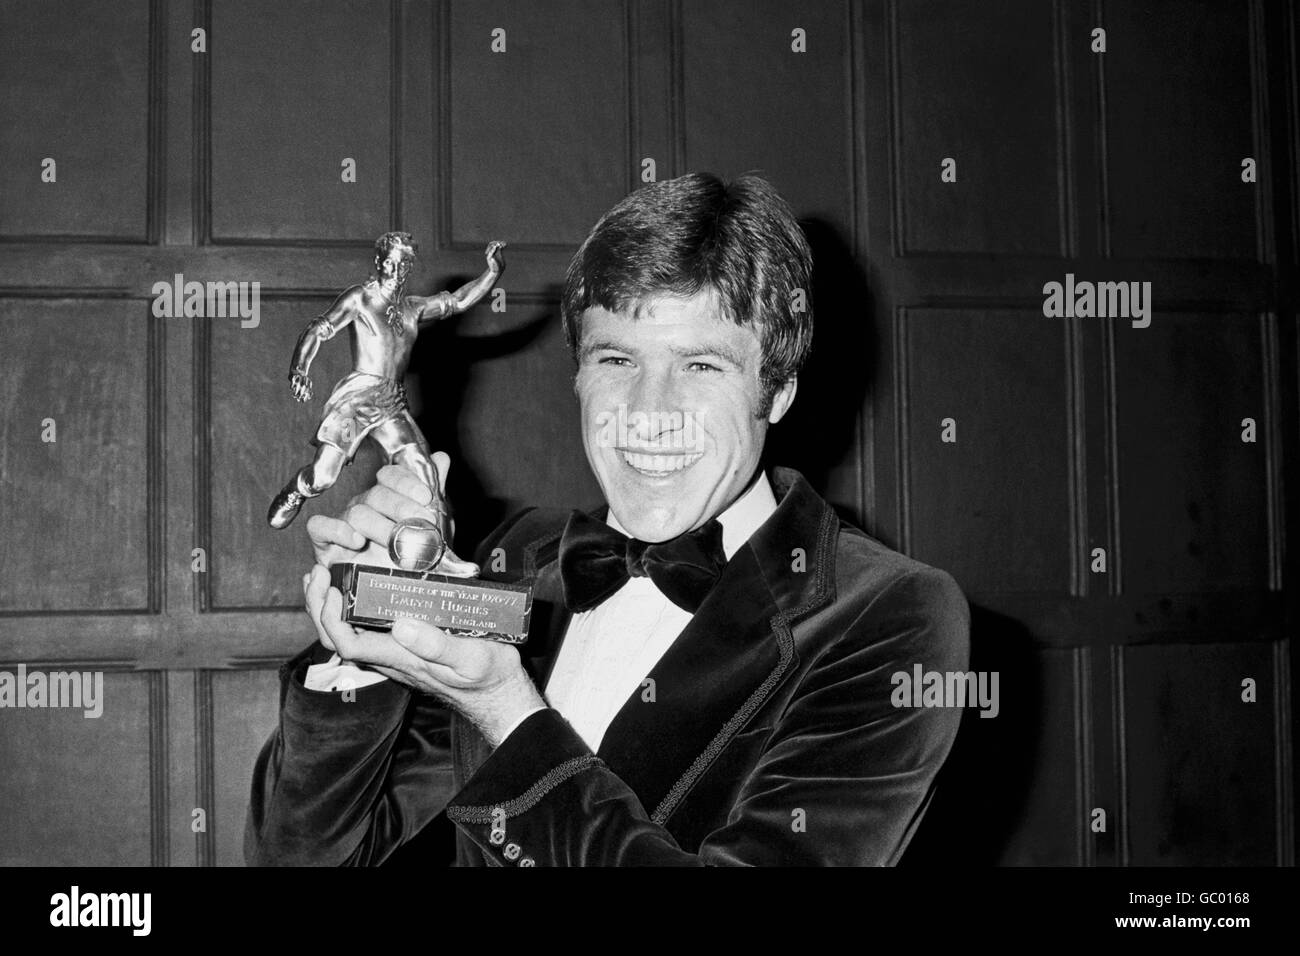 Liverpool's Emlyn Hughes shows off his 1976-77 Footballer of the Year trophy Stock Photo